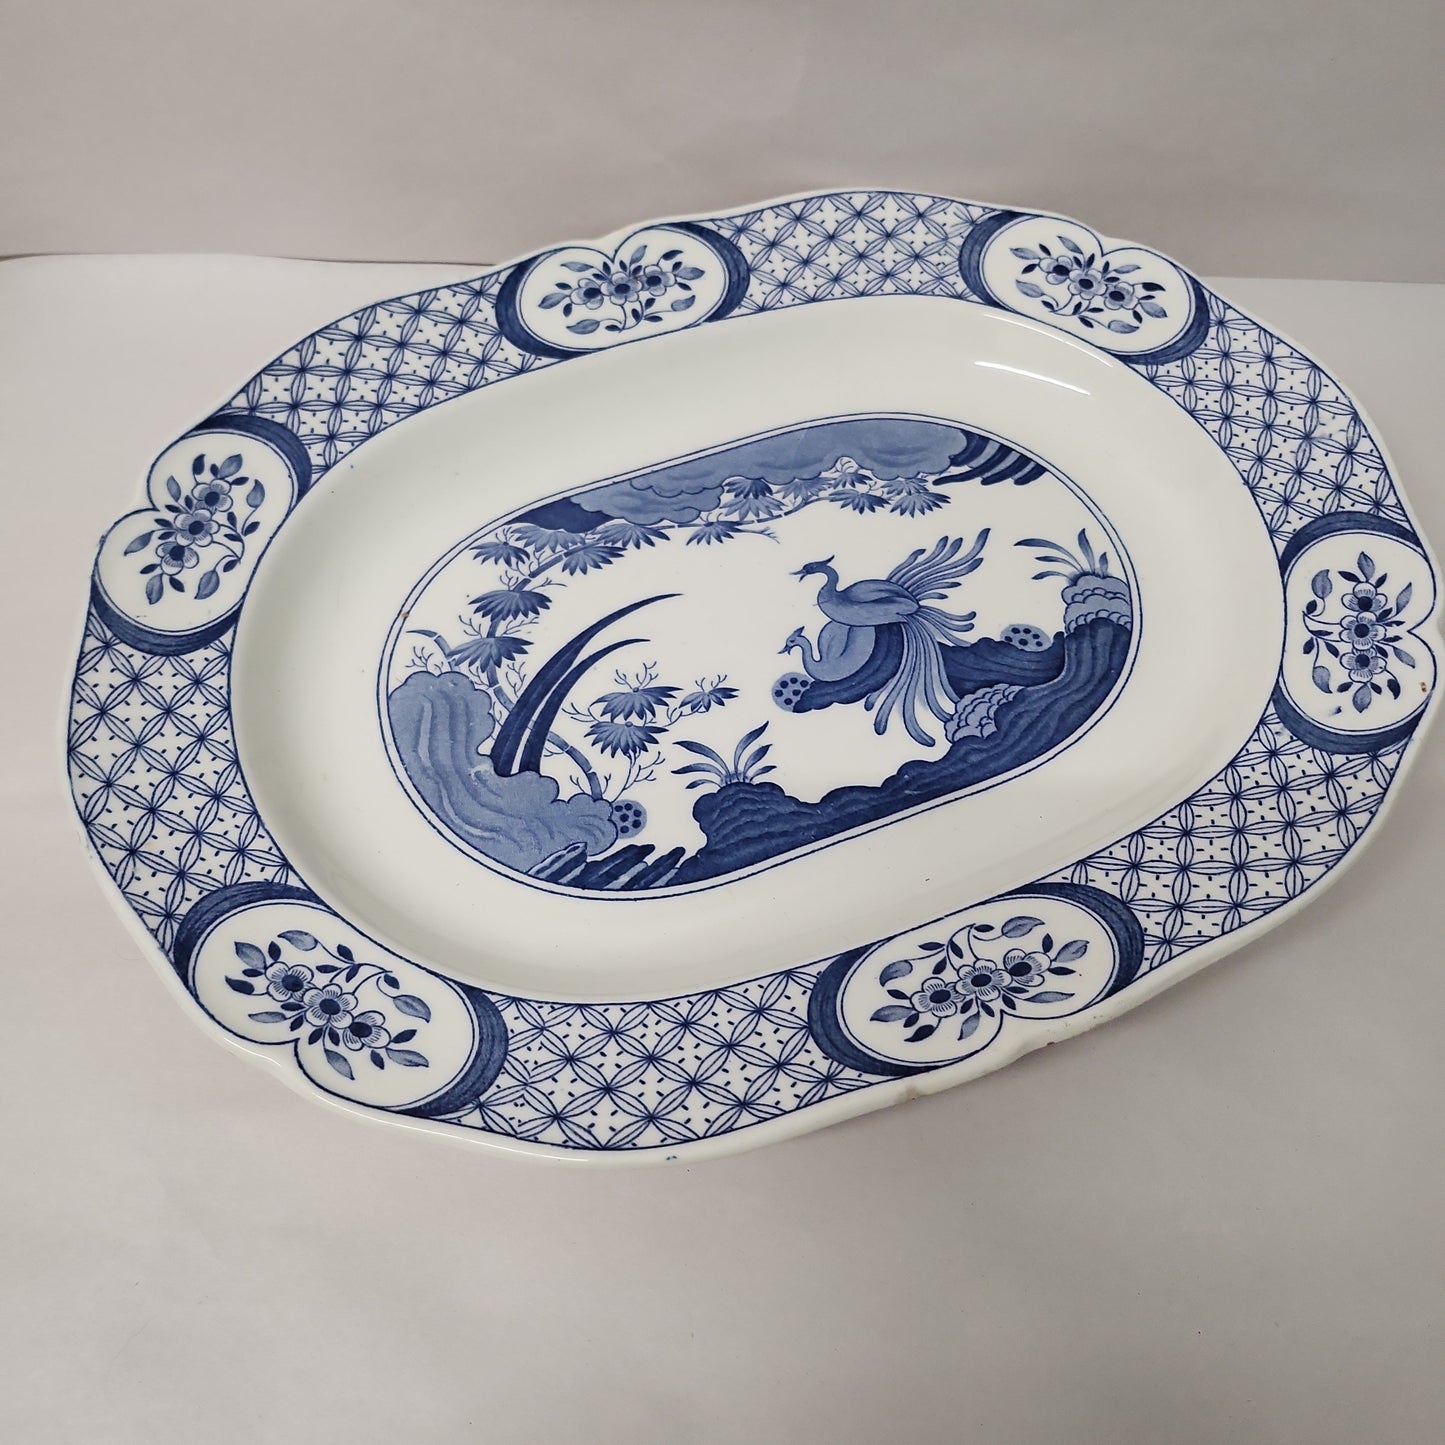 Rare Furnival old Chelsea blue and white platter 35 x 27 cm